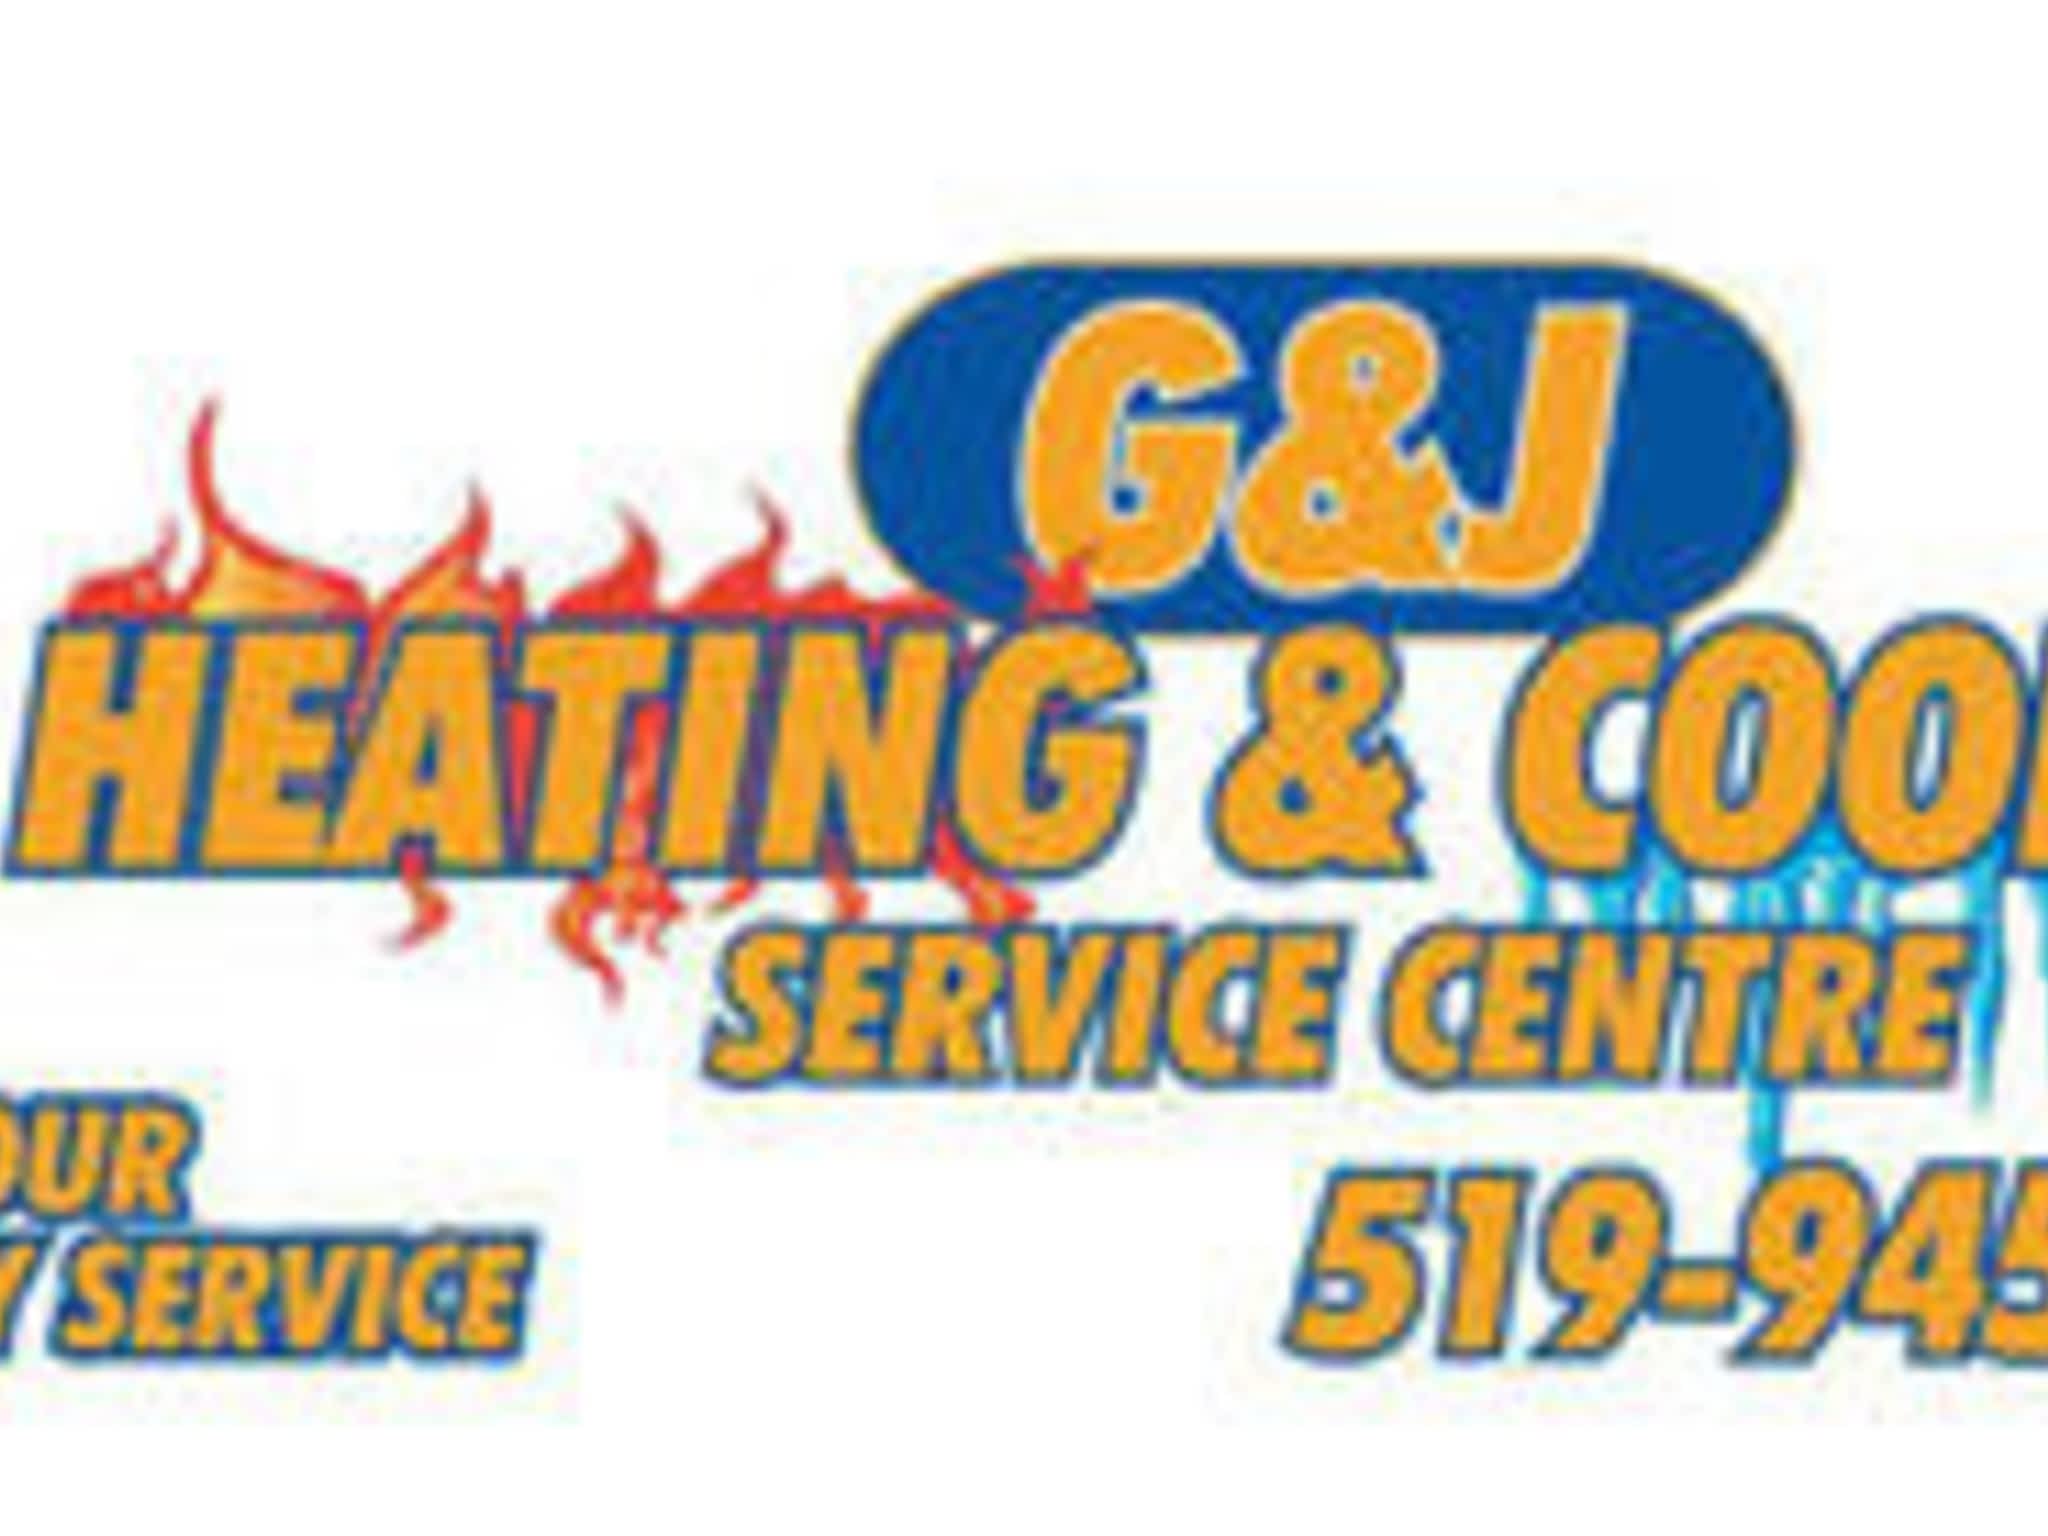 photo G & J Air Conditioning